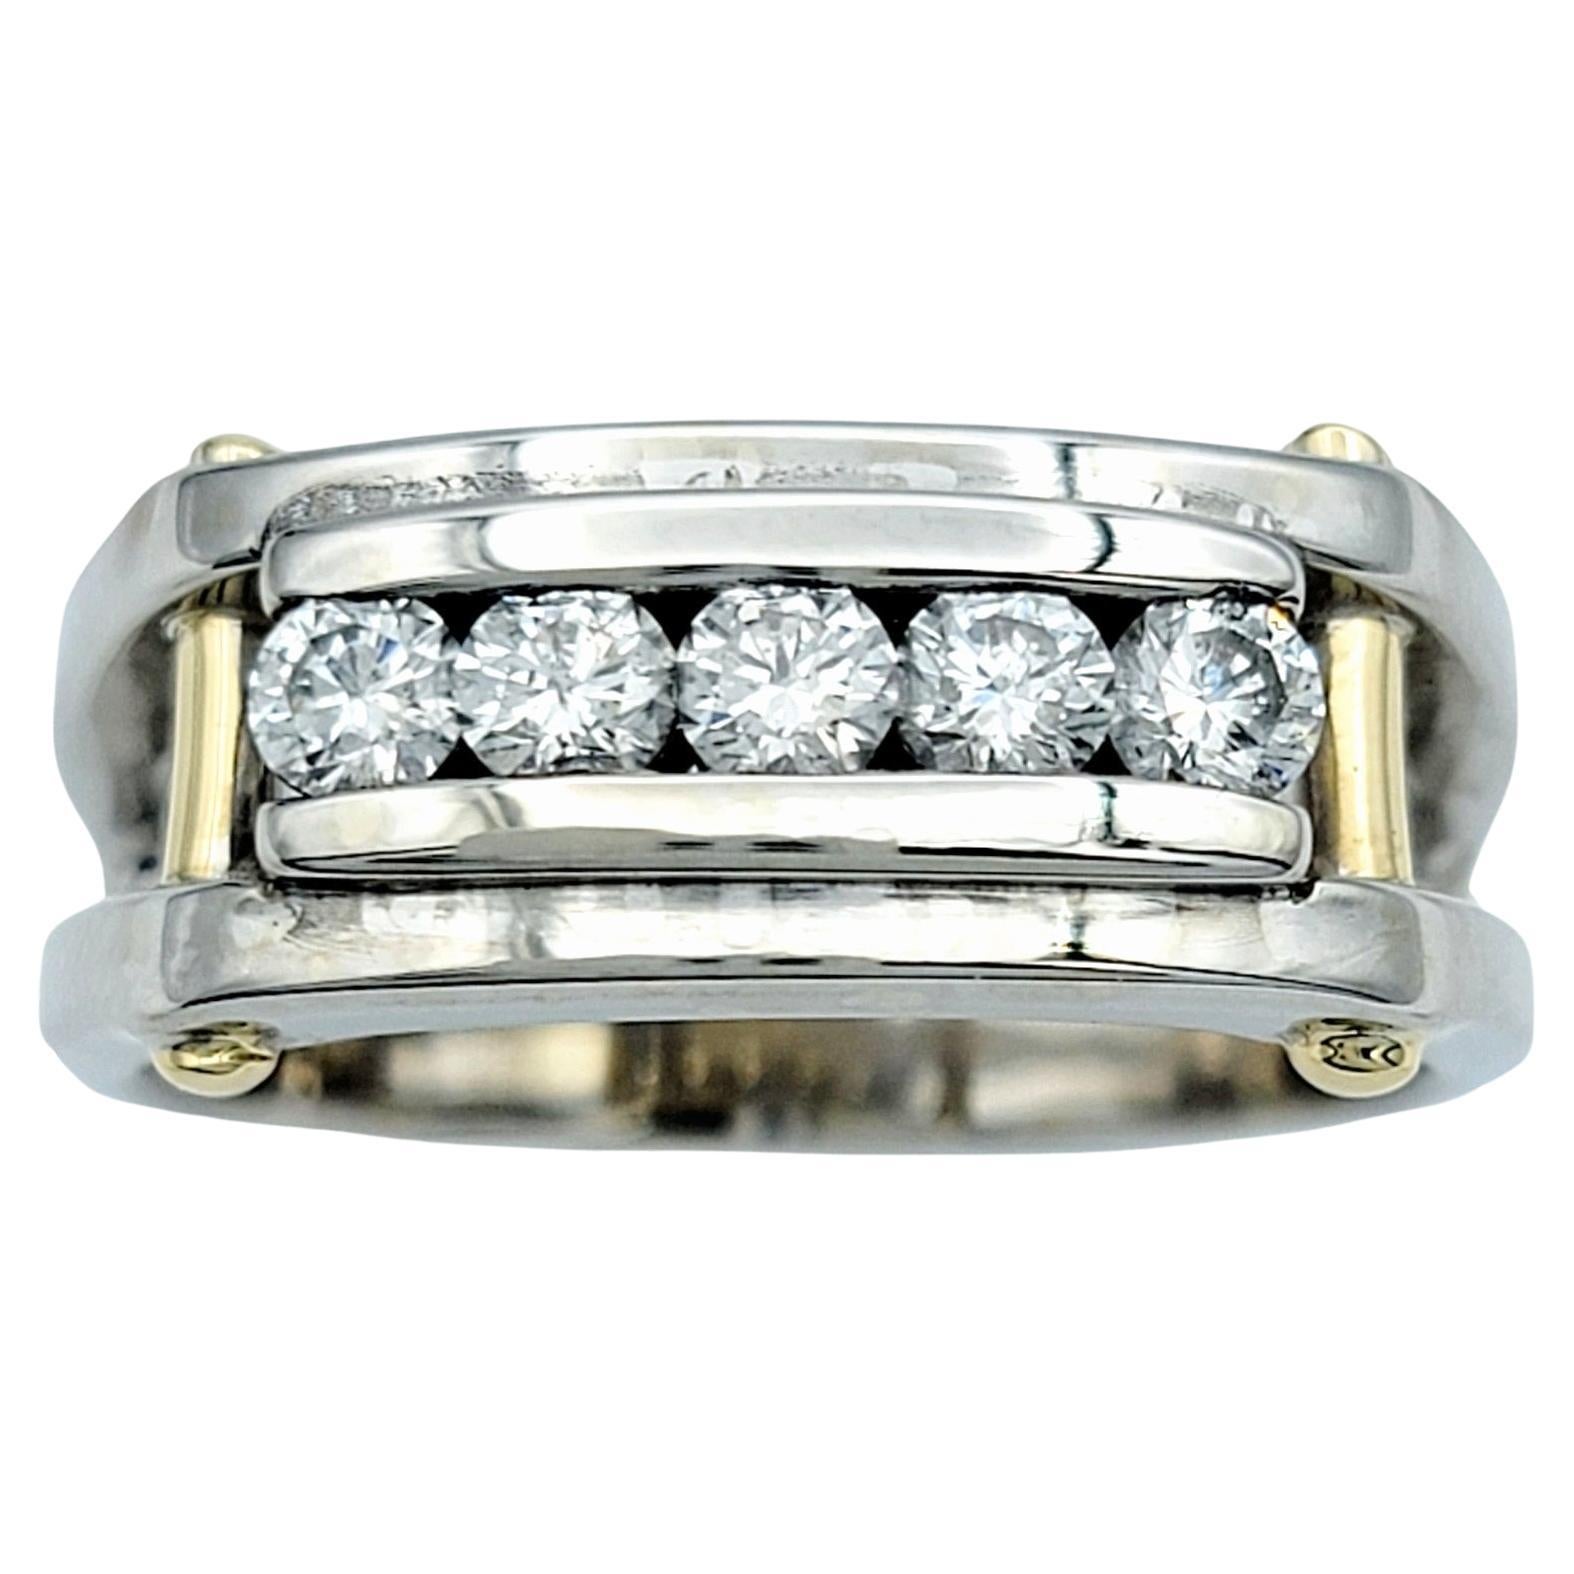 Men's Channel Set Five Diamond Contemporary Band Ring in Two Tone 14 Karat Gold